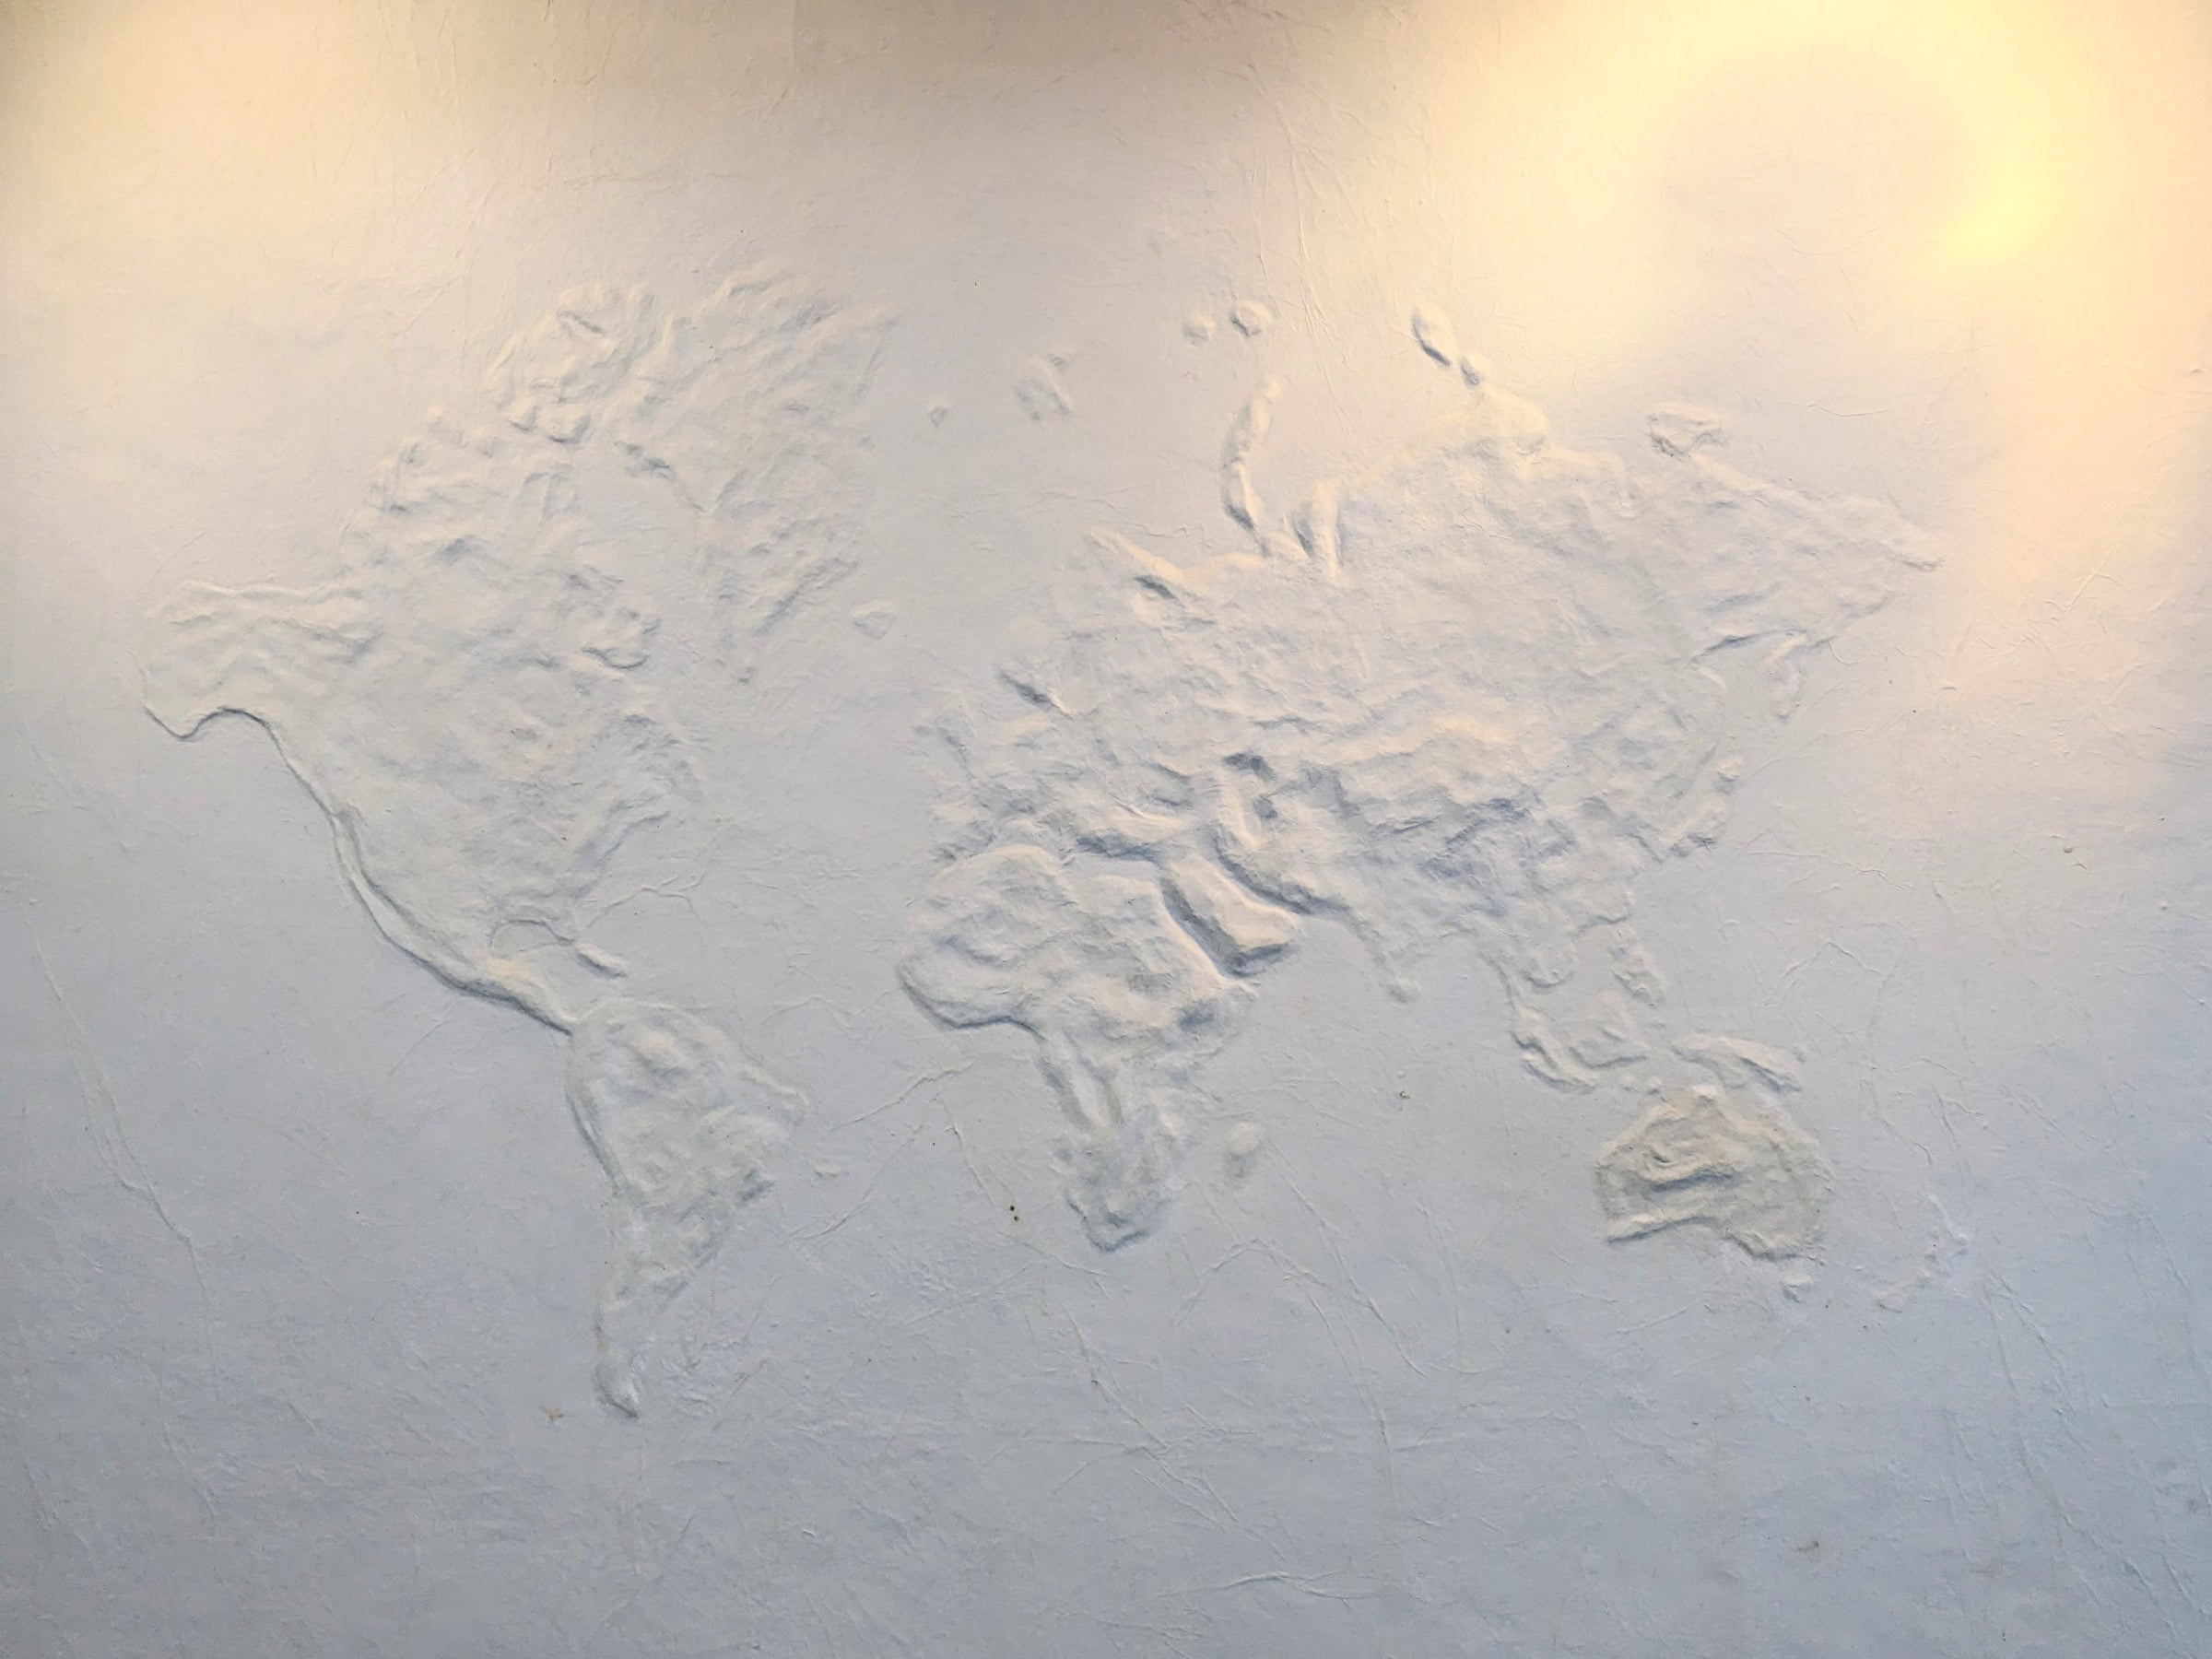 World map made with kozo pulp